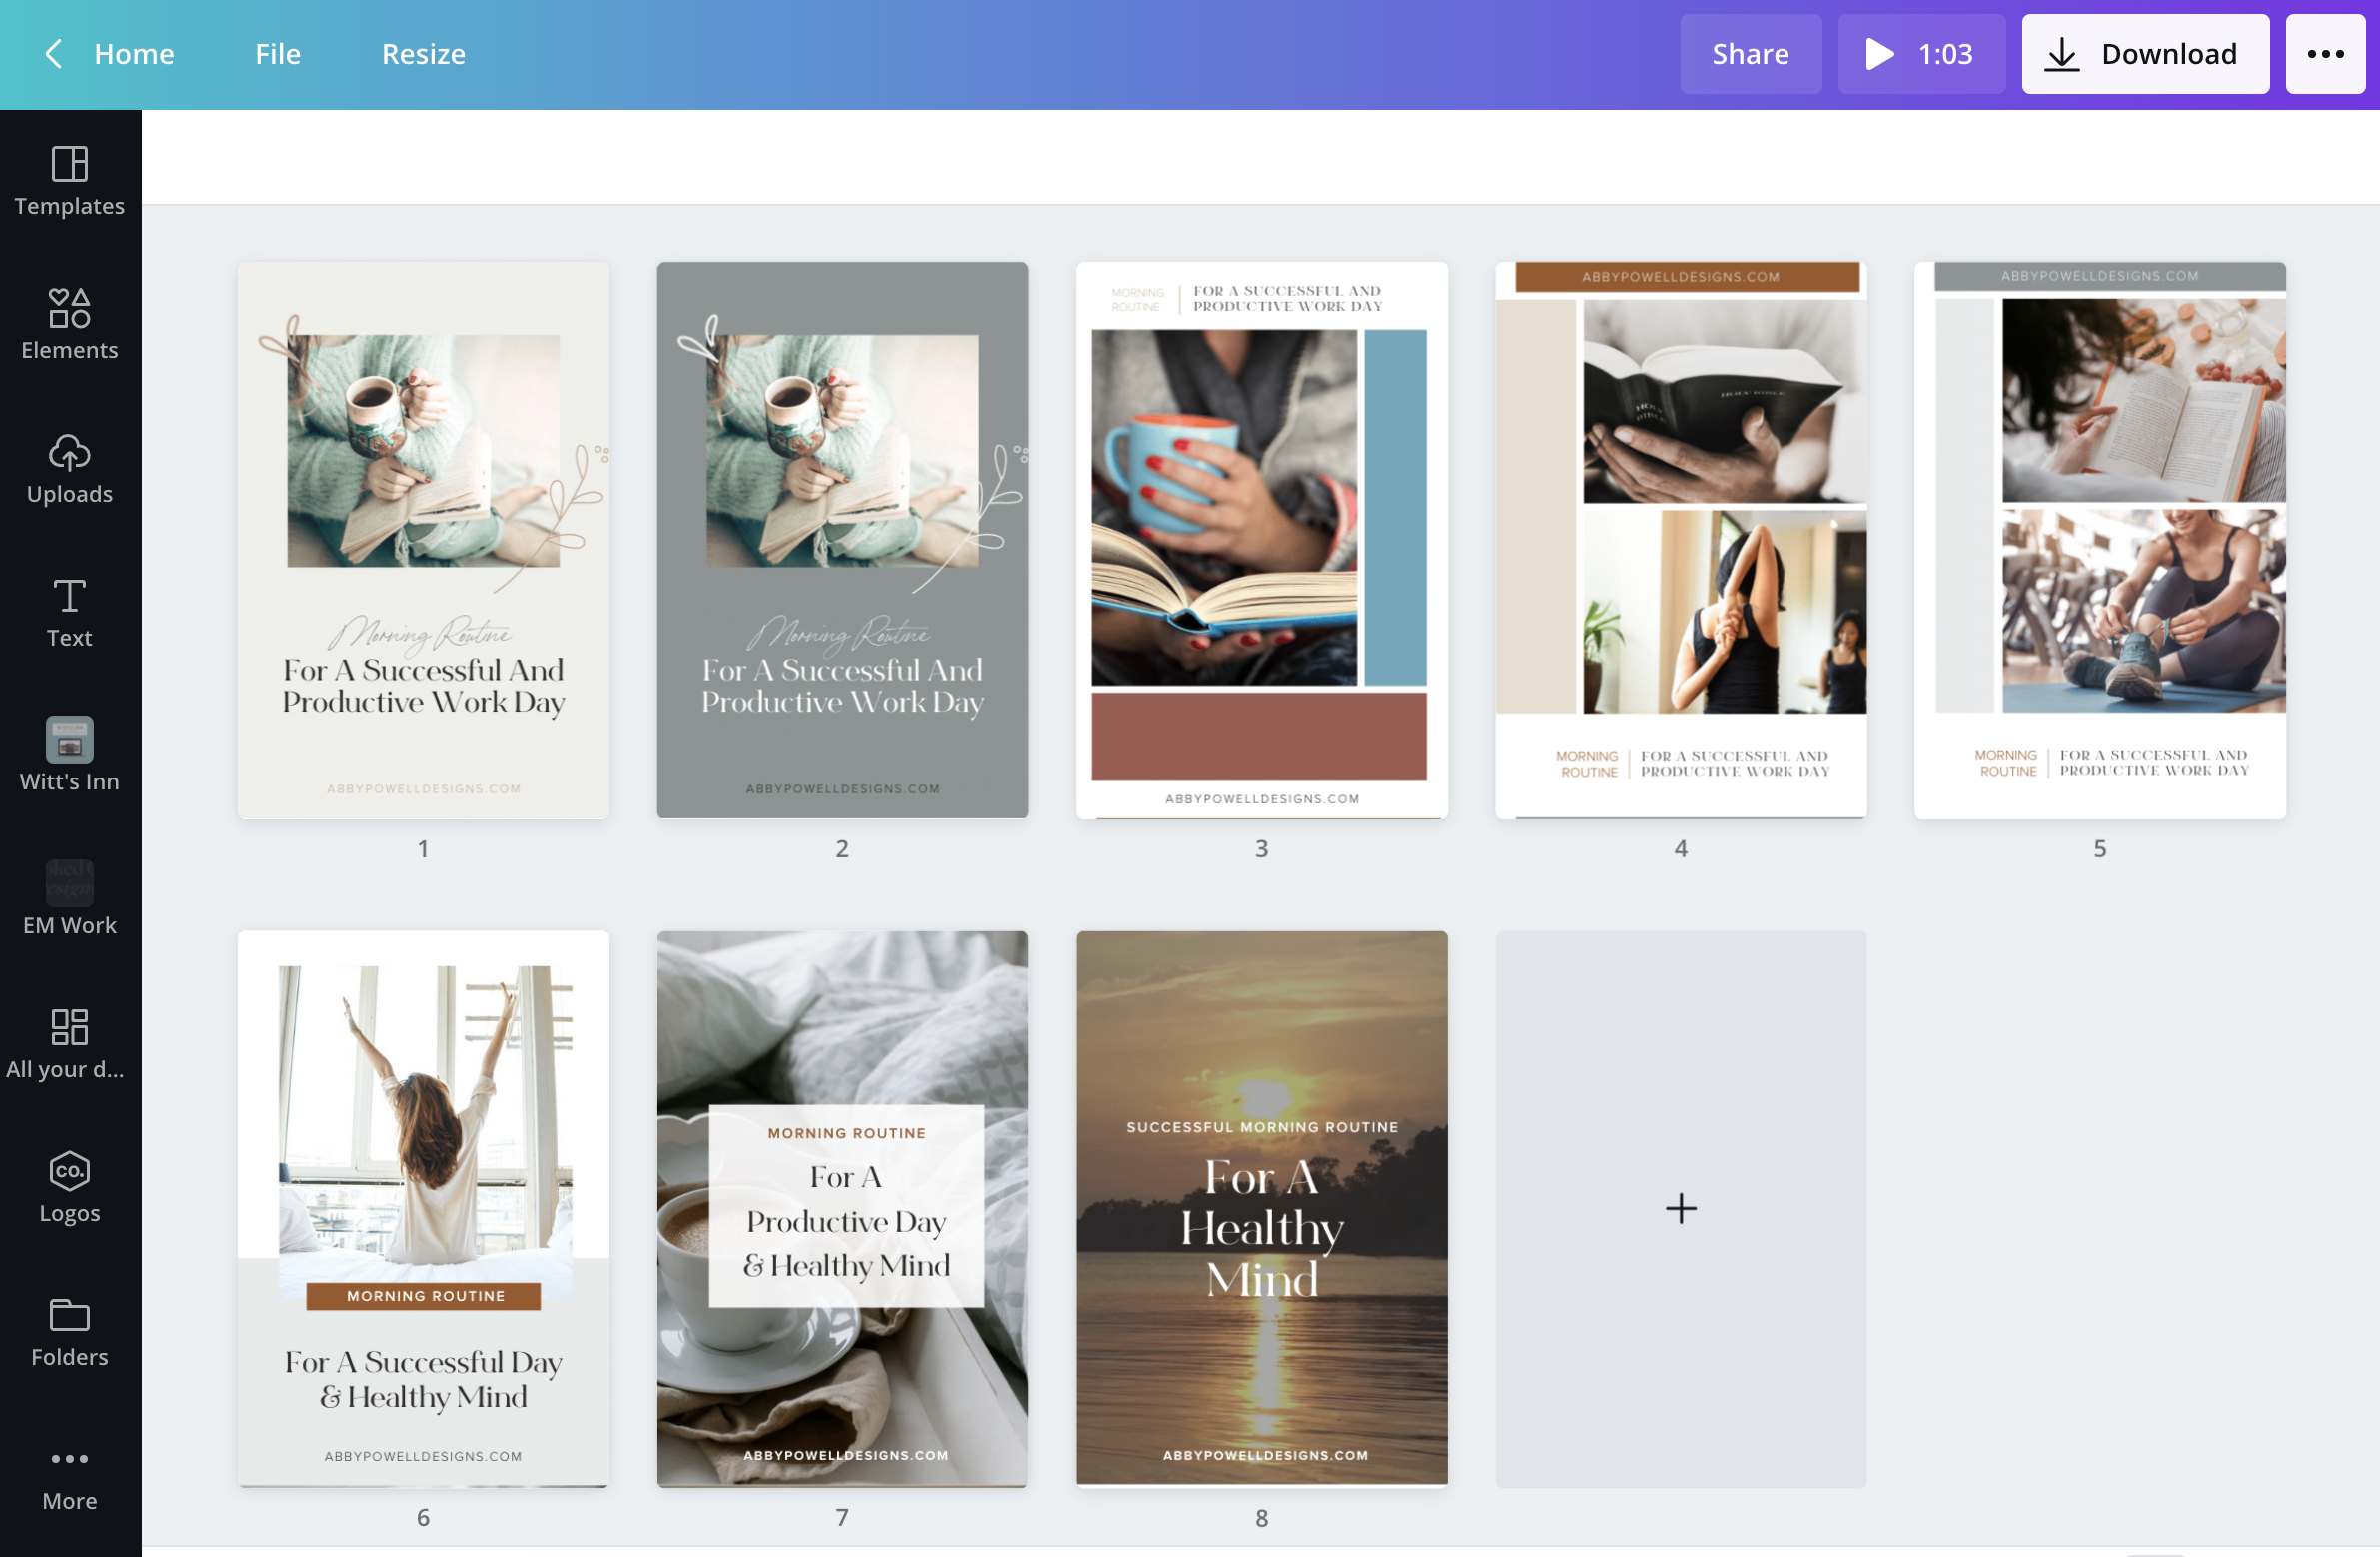 Using Canva Pro to create multiple Pinterest images for each blog post.